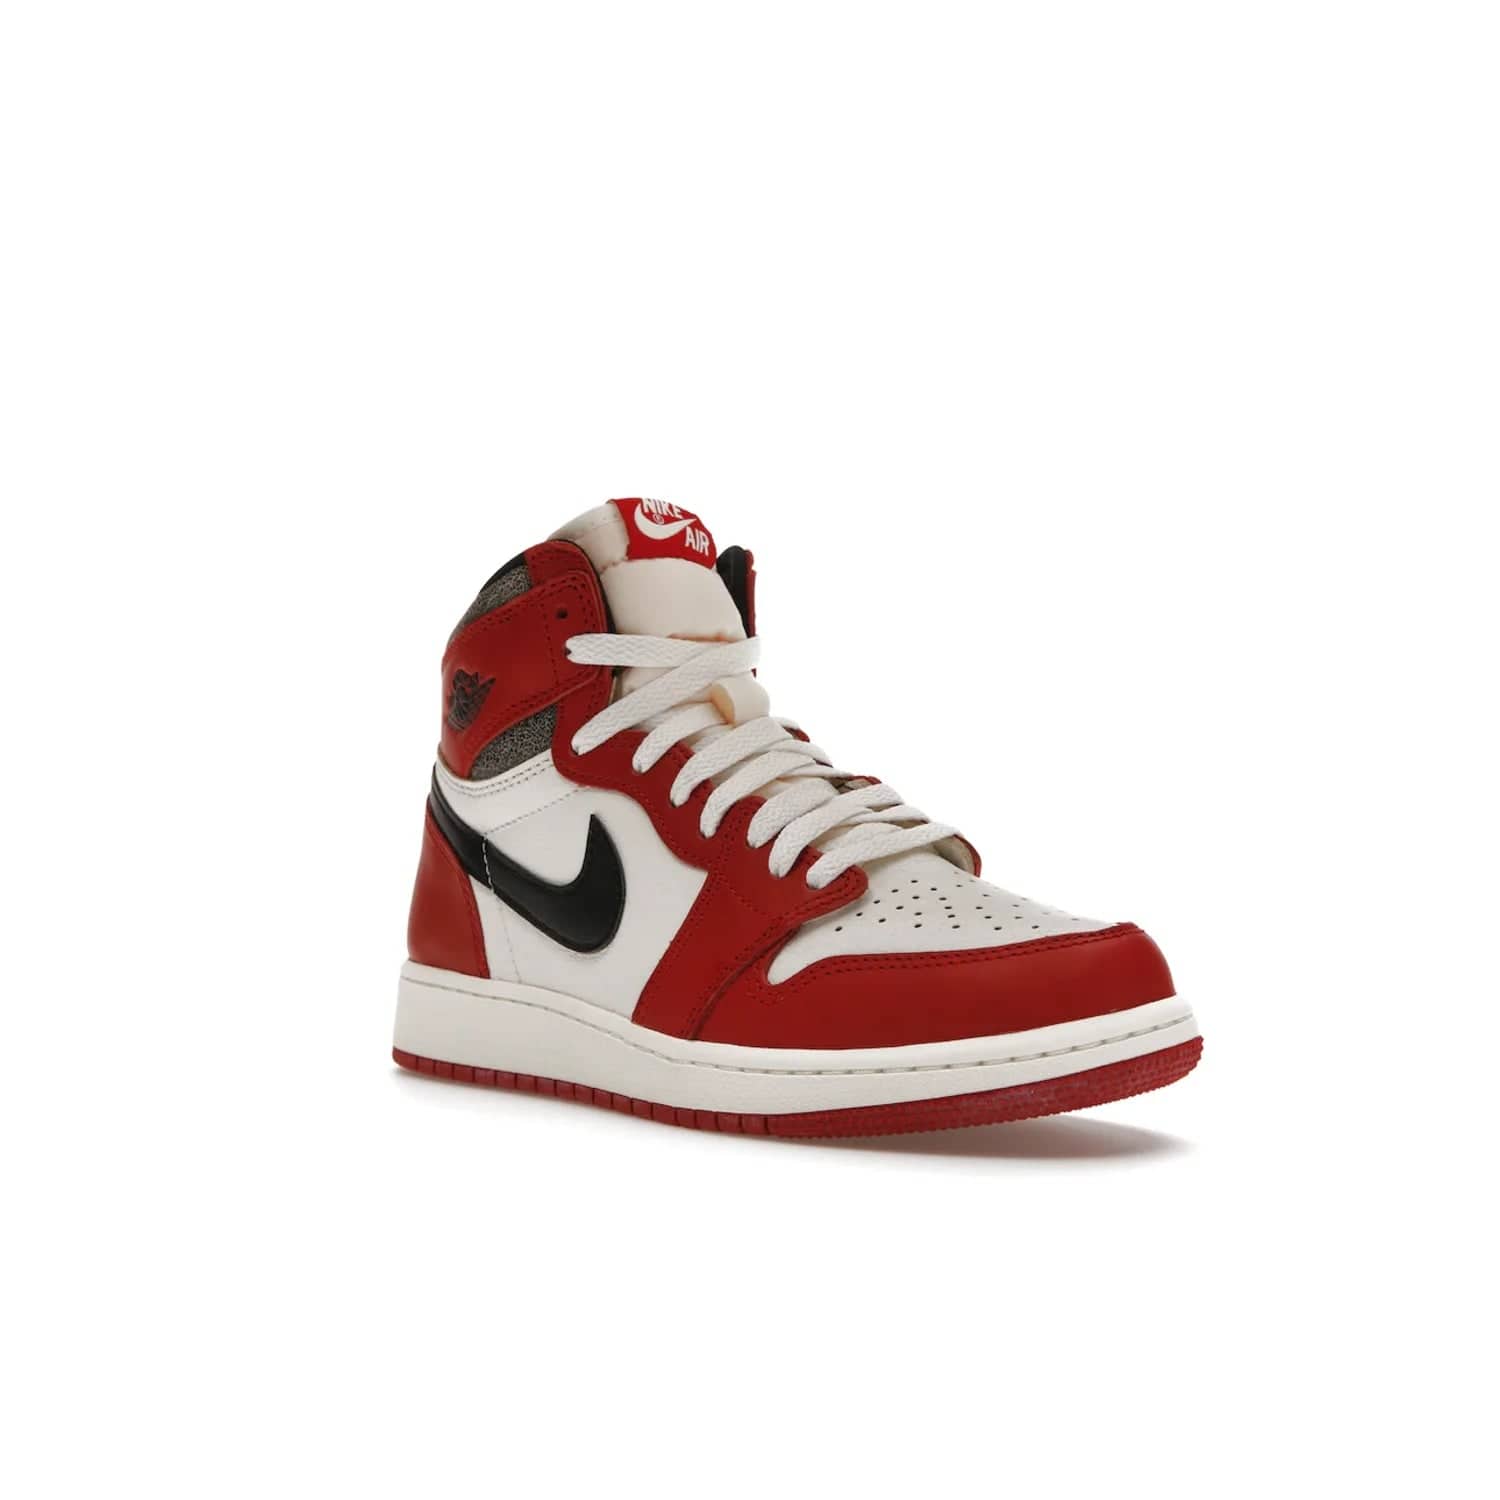 Jordan 1 Retro High OG Chicago Lost and Found (GS) - Image 6 - Only at www.BallersClubKickz.com - Grab the Air Jordan 1 Retro High OG Chicago Reimagined GS, presenting in classic 1985 silhouette. Varsity Red, Black, Muslin and Sail hues, featuring Nike Air branding, Wings on the collars and printed insoles. Don't miss out when it releases 19th Nov 2022.